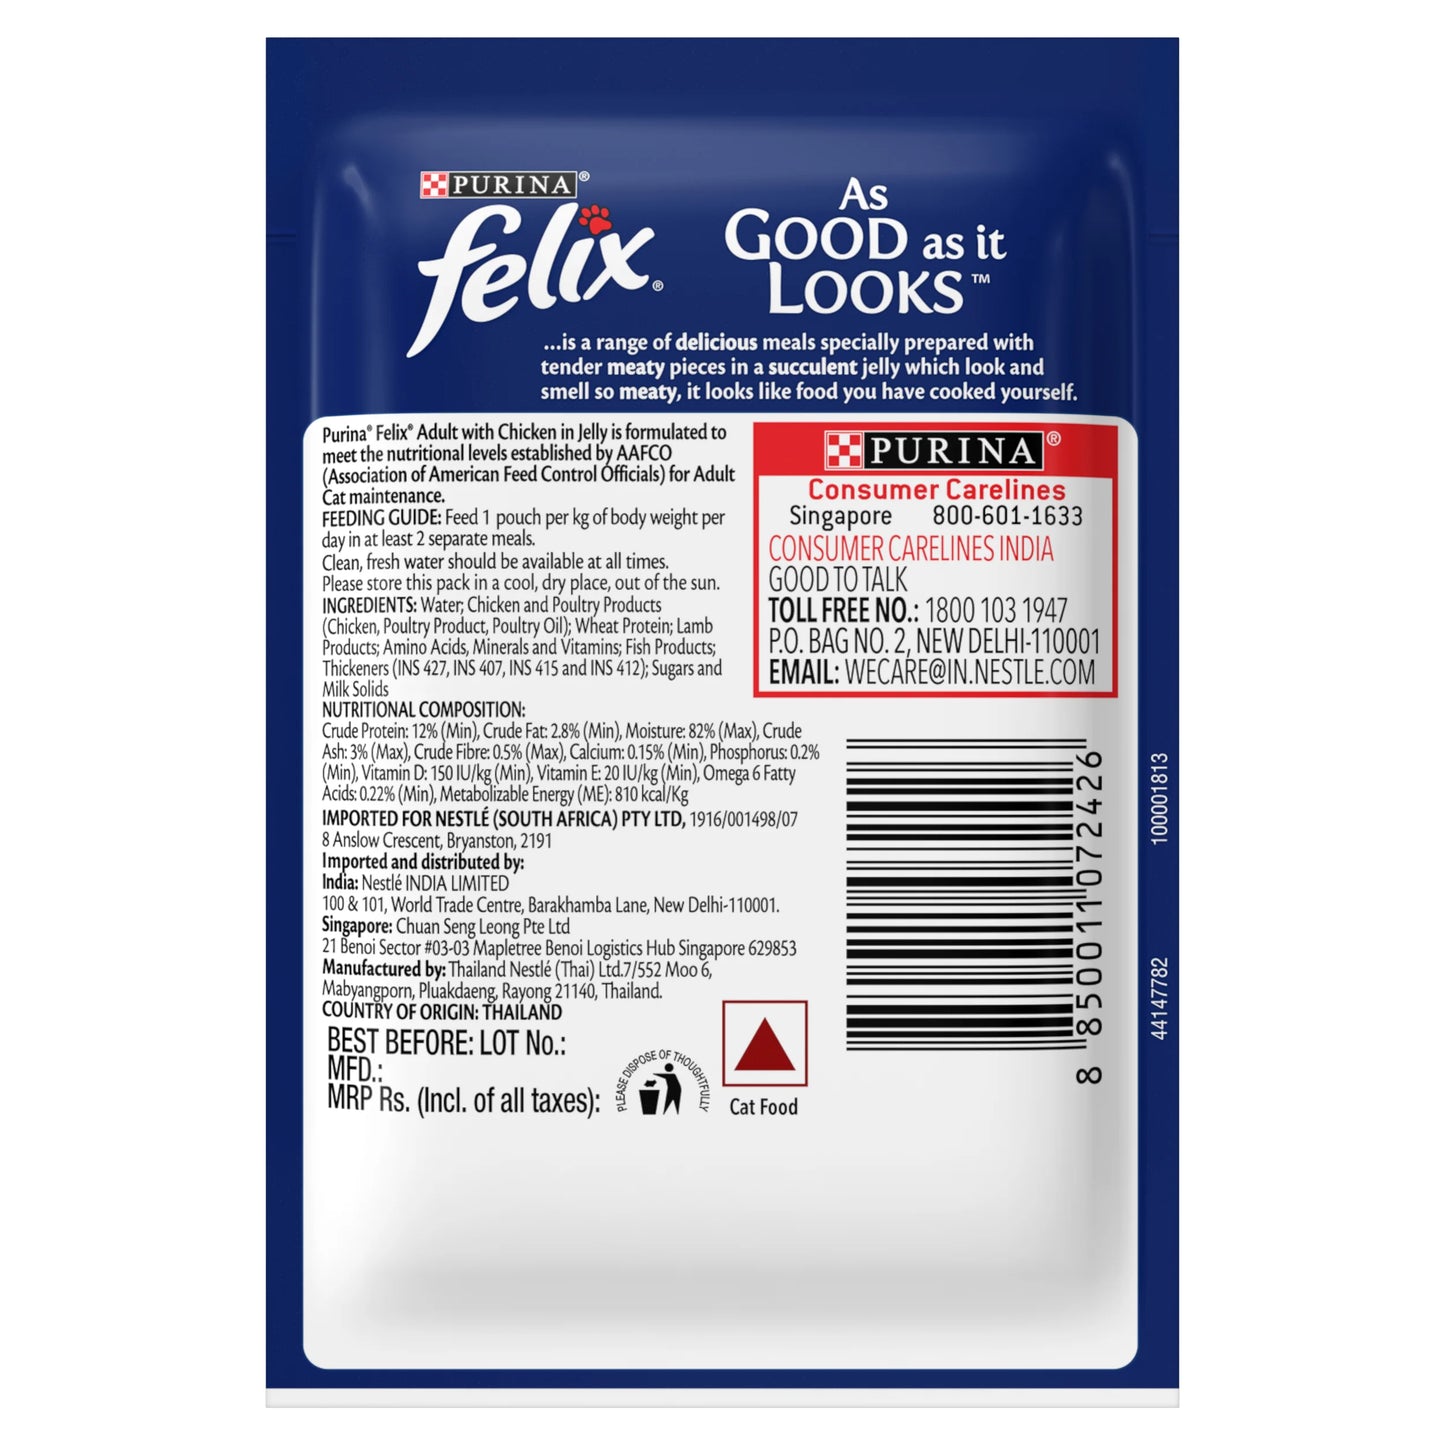 Purina Felix Chicken in Jelly Wet Cat Food 85g (Pack of 12)